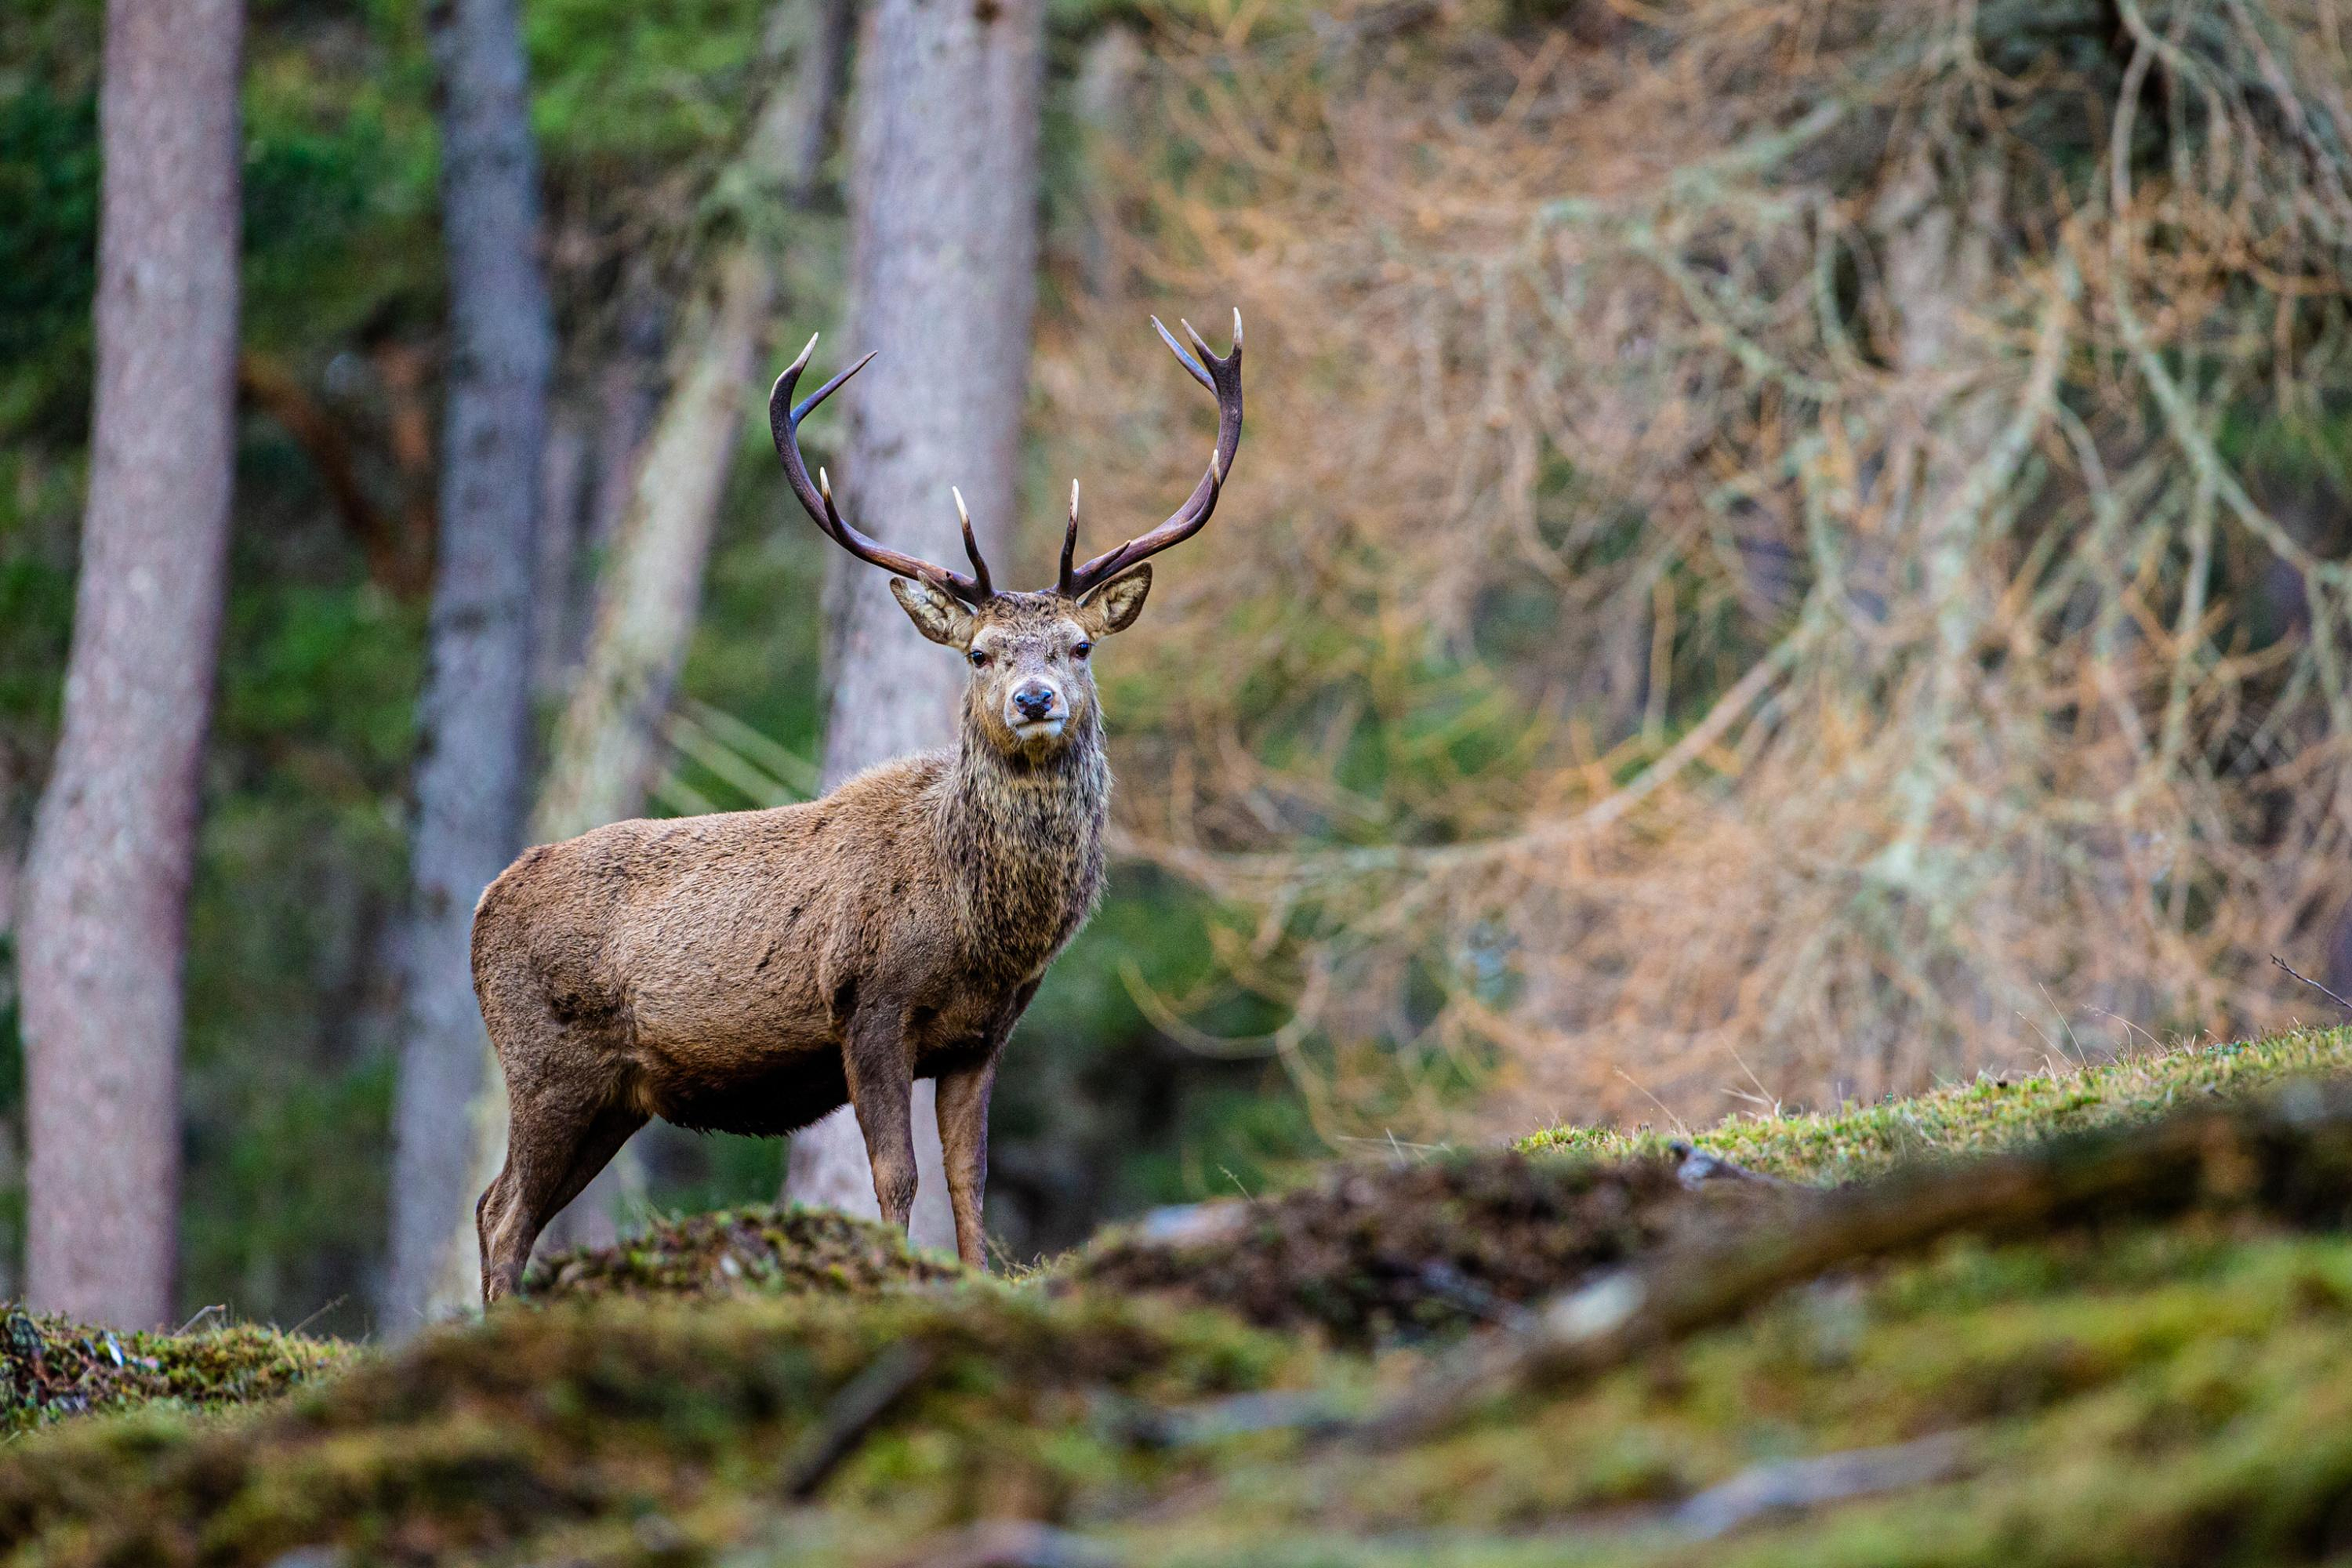 Forests: the Court of Auditors warns of the ravages of deer and calls for more public support